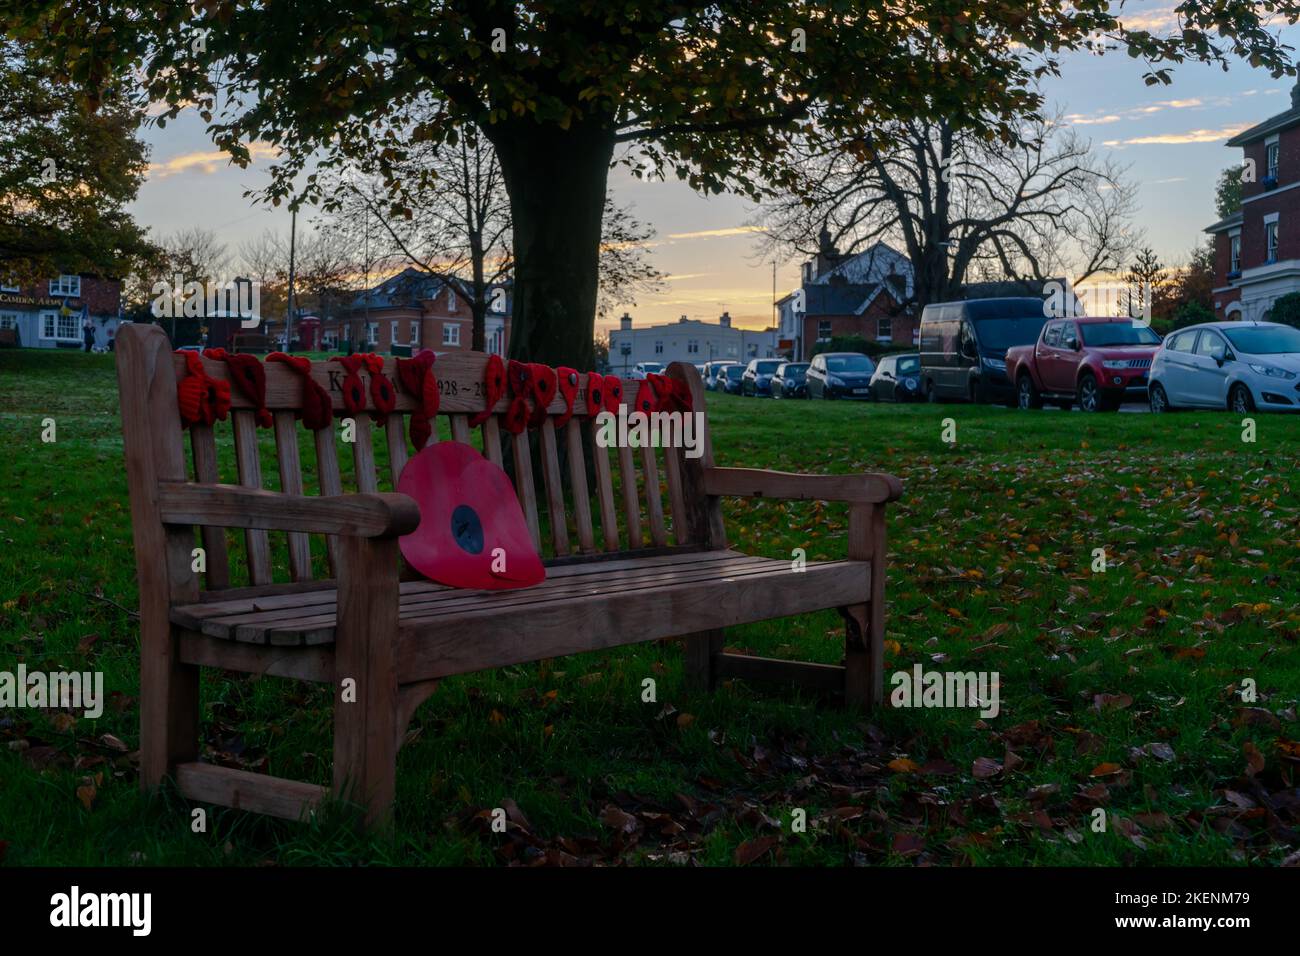 Pembury, Tunbridge Wells, Kent, England. 13 November 2022. Remembrance Day is marked by a collection of poppies and silhouettes of fallen soldiers on Pembury Village Green, shot at dusk  ©Sarah Mott / Alamy Live News. Stock Photo